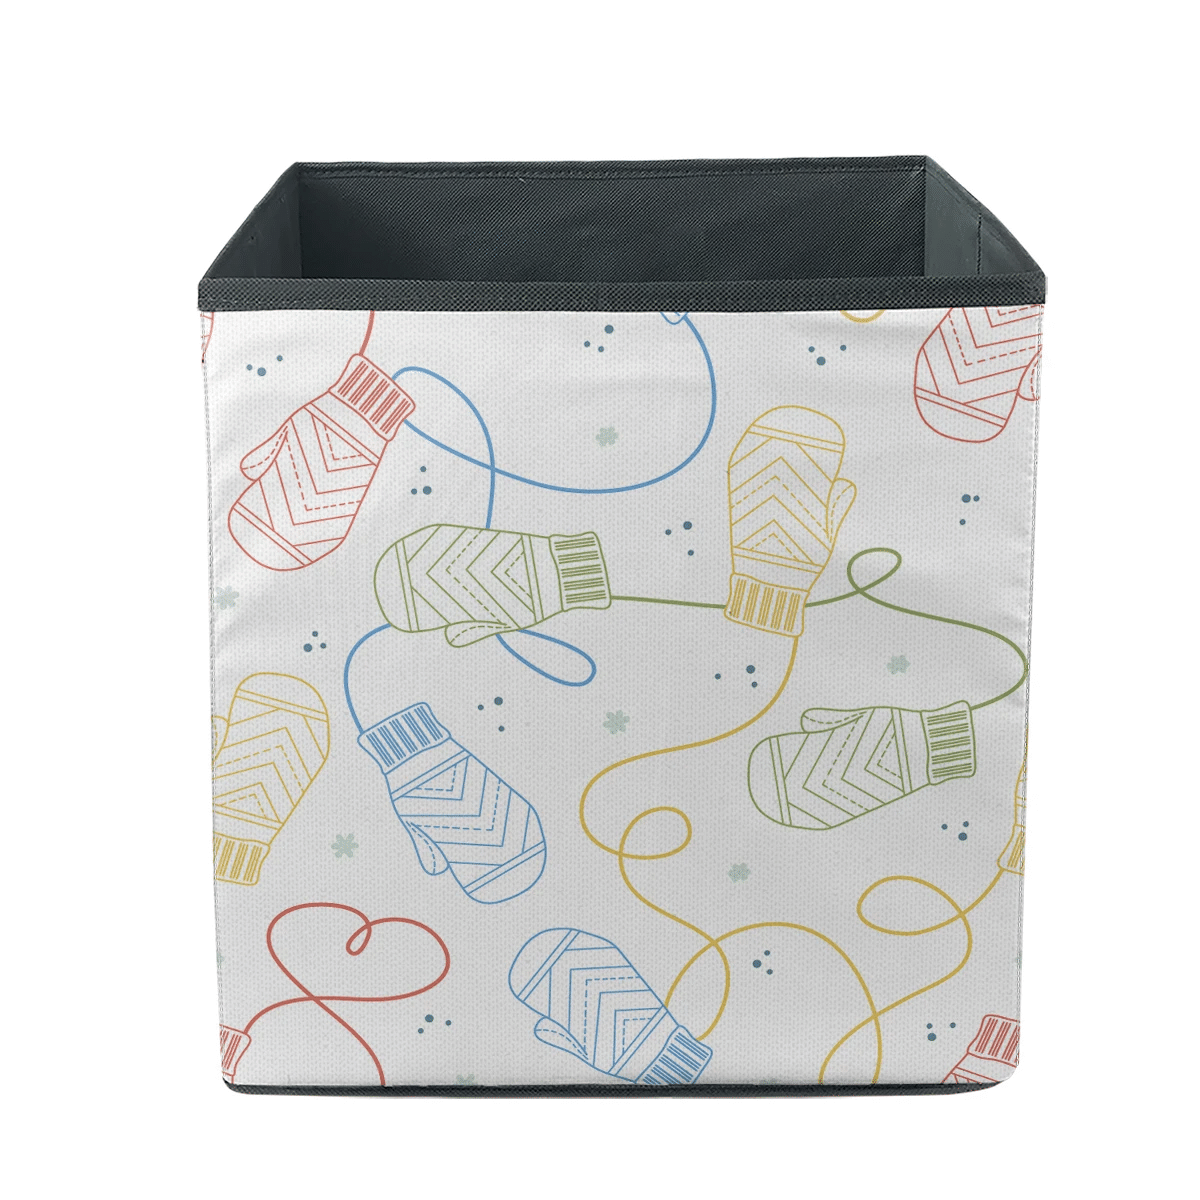 Colorful Cute Hand Drawn Outline Mittens Knitting Storage Bin Storage Cube